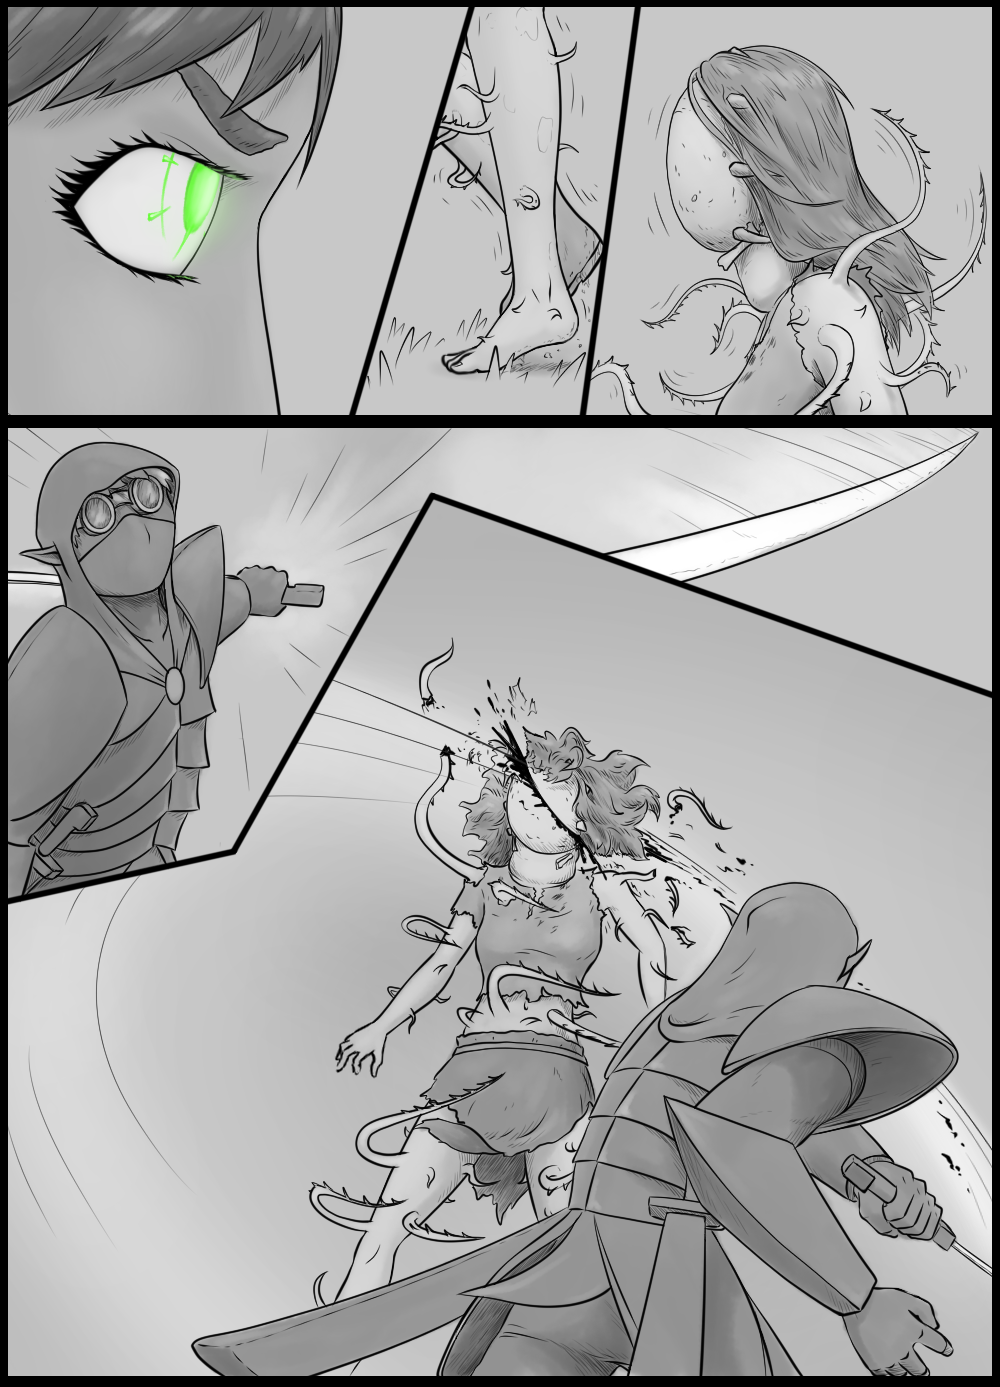 Page 31 - The creature attacks (Part 2)